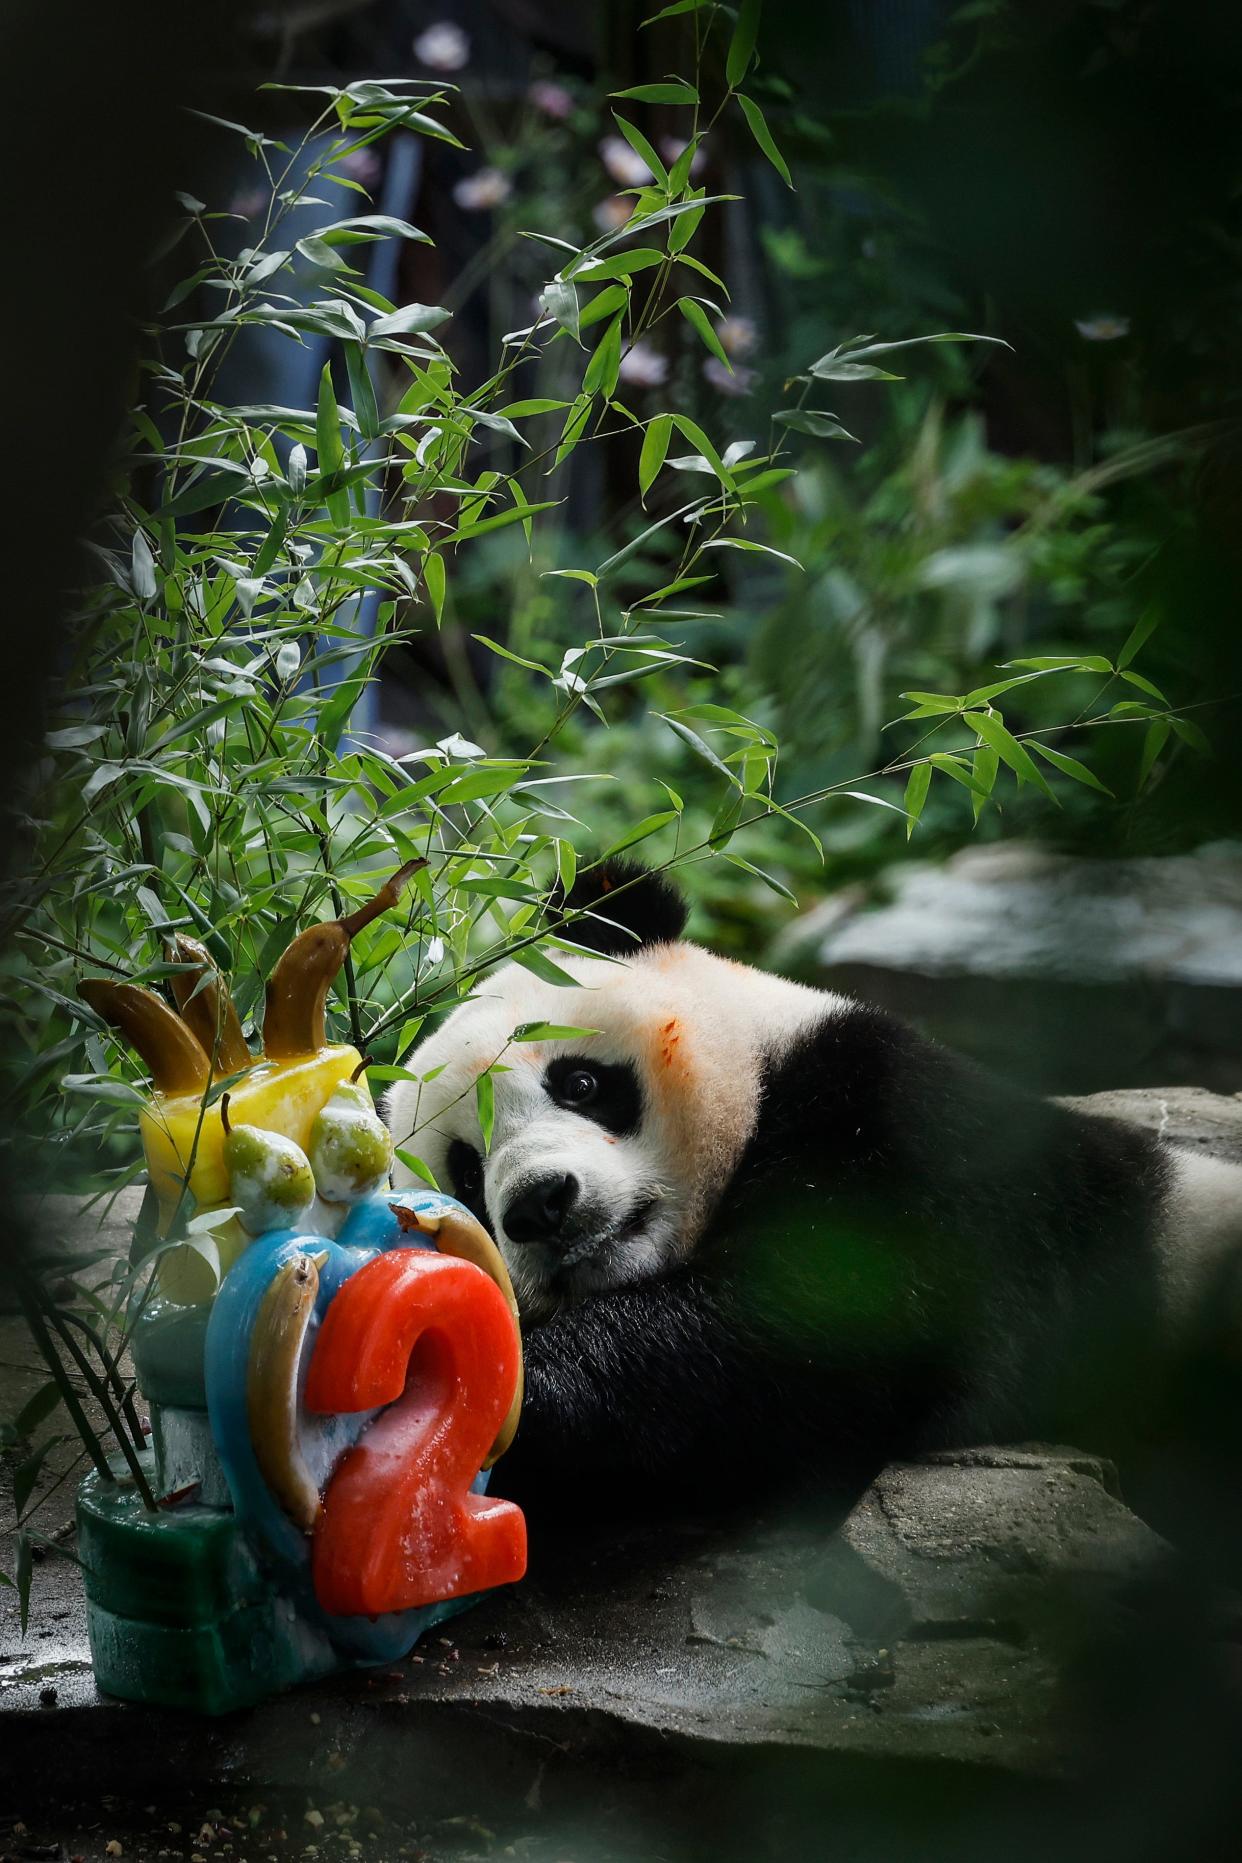 WASHINGTON, DC - AUGUST 21: Male giant panda Xiao Qi Ji eats an ice cake for his second birthday at the Smithsonian National Zoo on August 21, 2022 in Washington, DC. Xiao Qi Ji is the fourth surviving cub of pandas Mei Xiang and Tian Tian. This year the National Zoo is marking 50 years since the first giant pandas came to DC. (Photo by Anna Moneymaker/Getty Images)